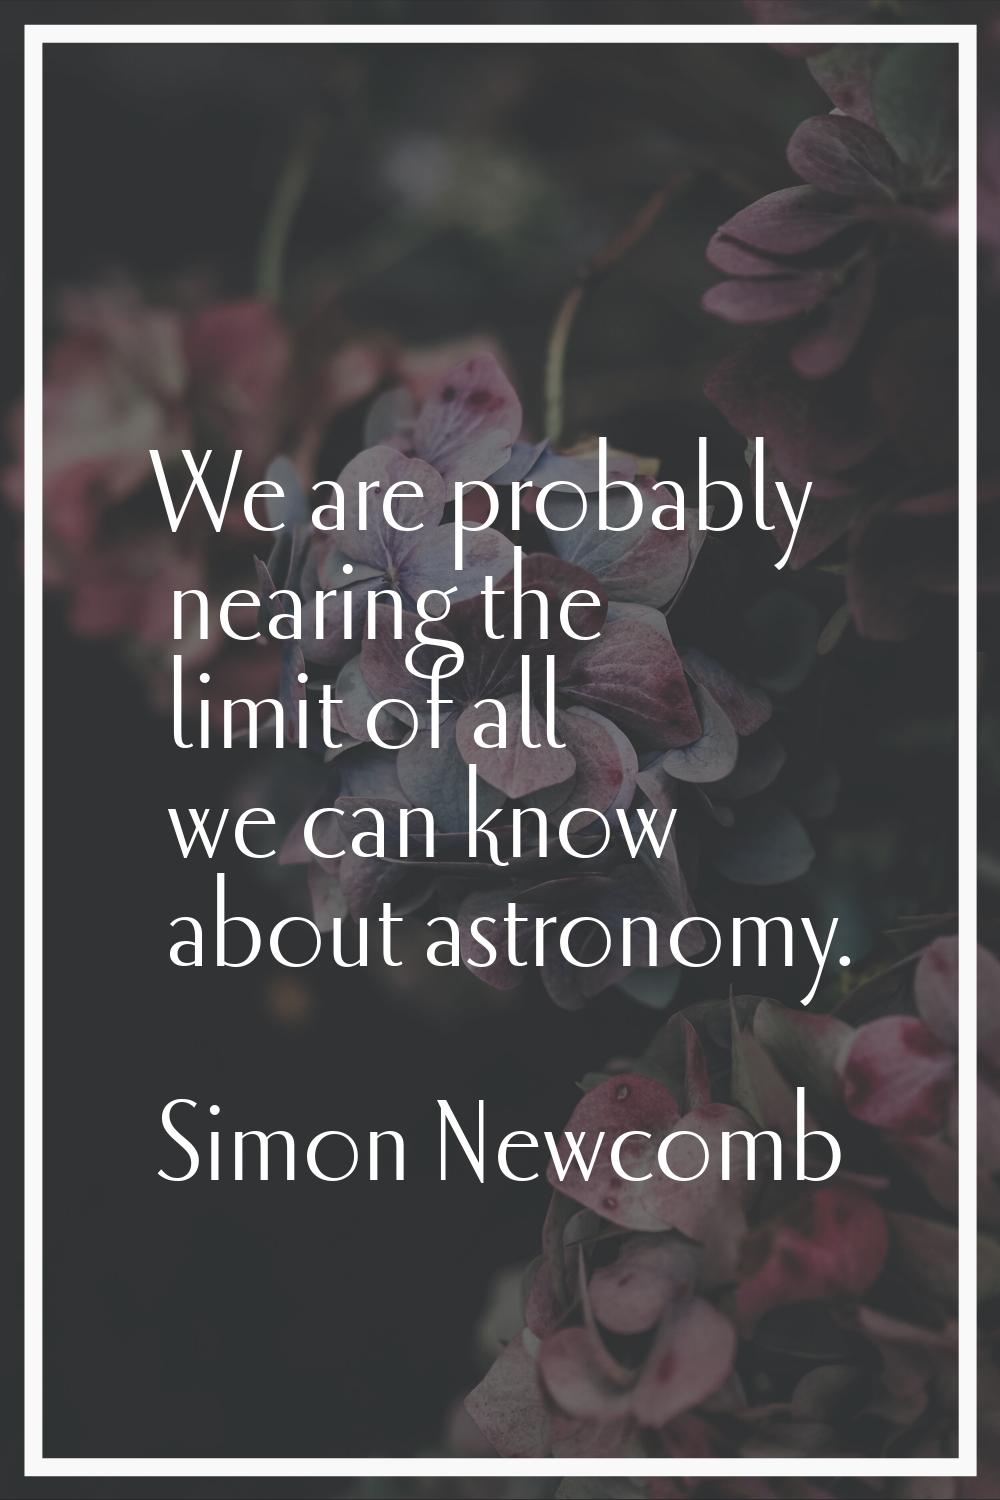 We are probably nearing the limit of all we can know about astronomy.